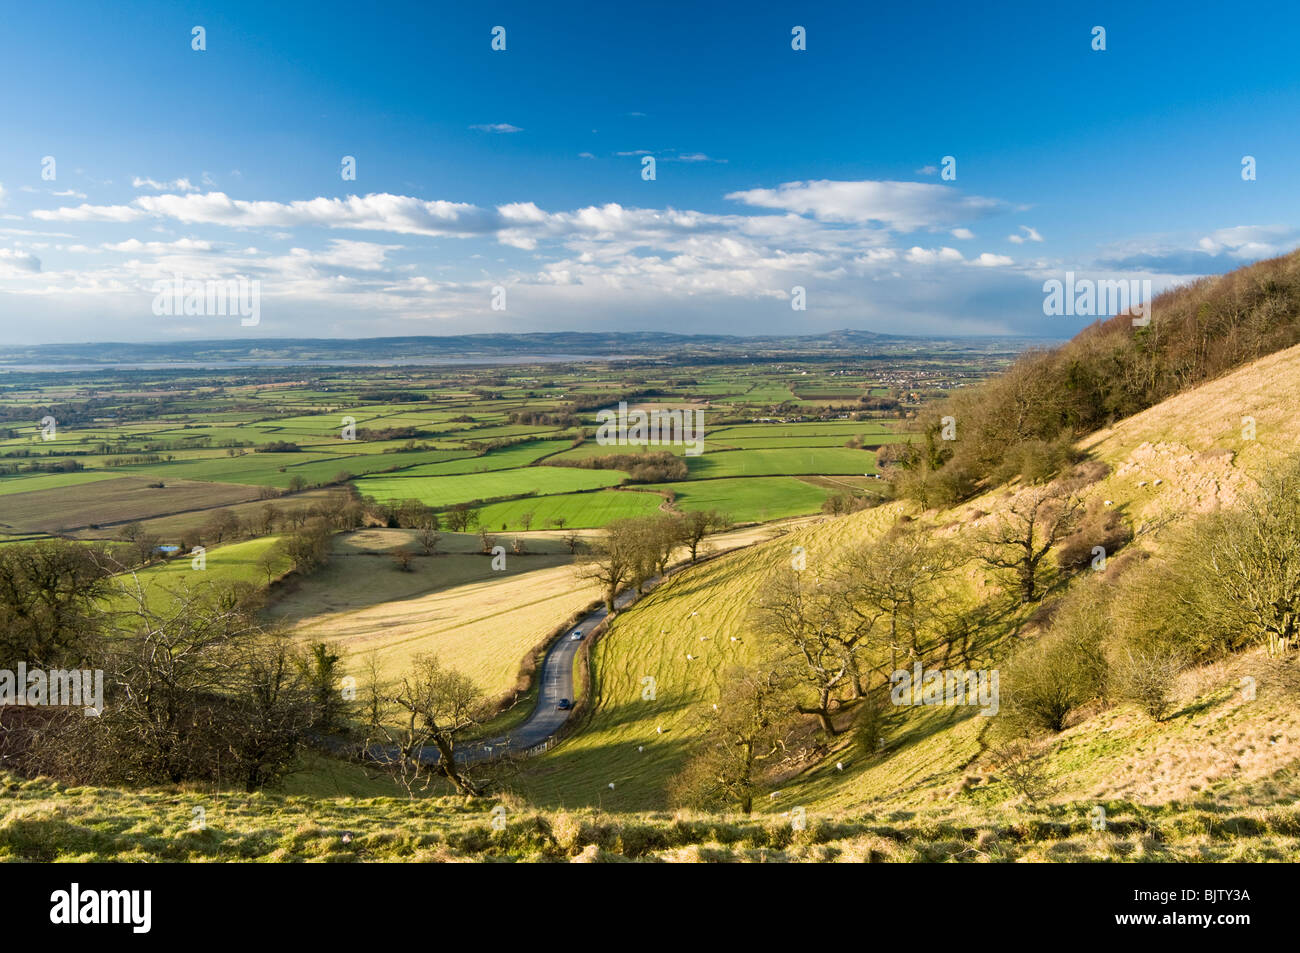 View of Cam, Dursley, Coaley and Berkeley in the Severn Vale from Coaley Peak, Cotswolds, Glucestershire, UK Stock Photo